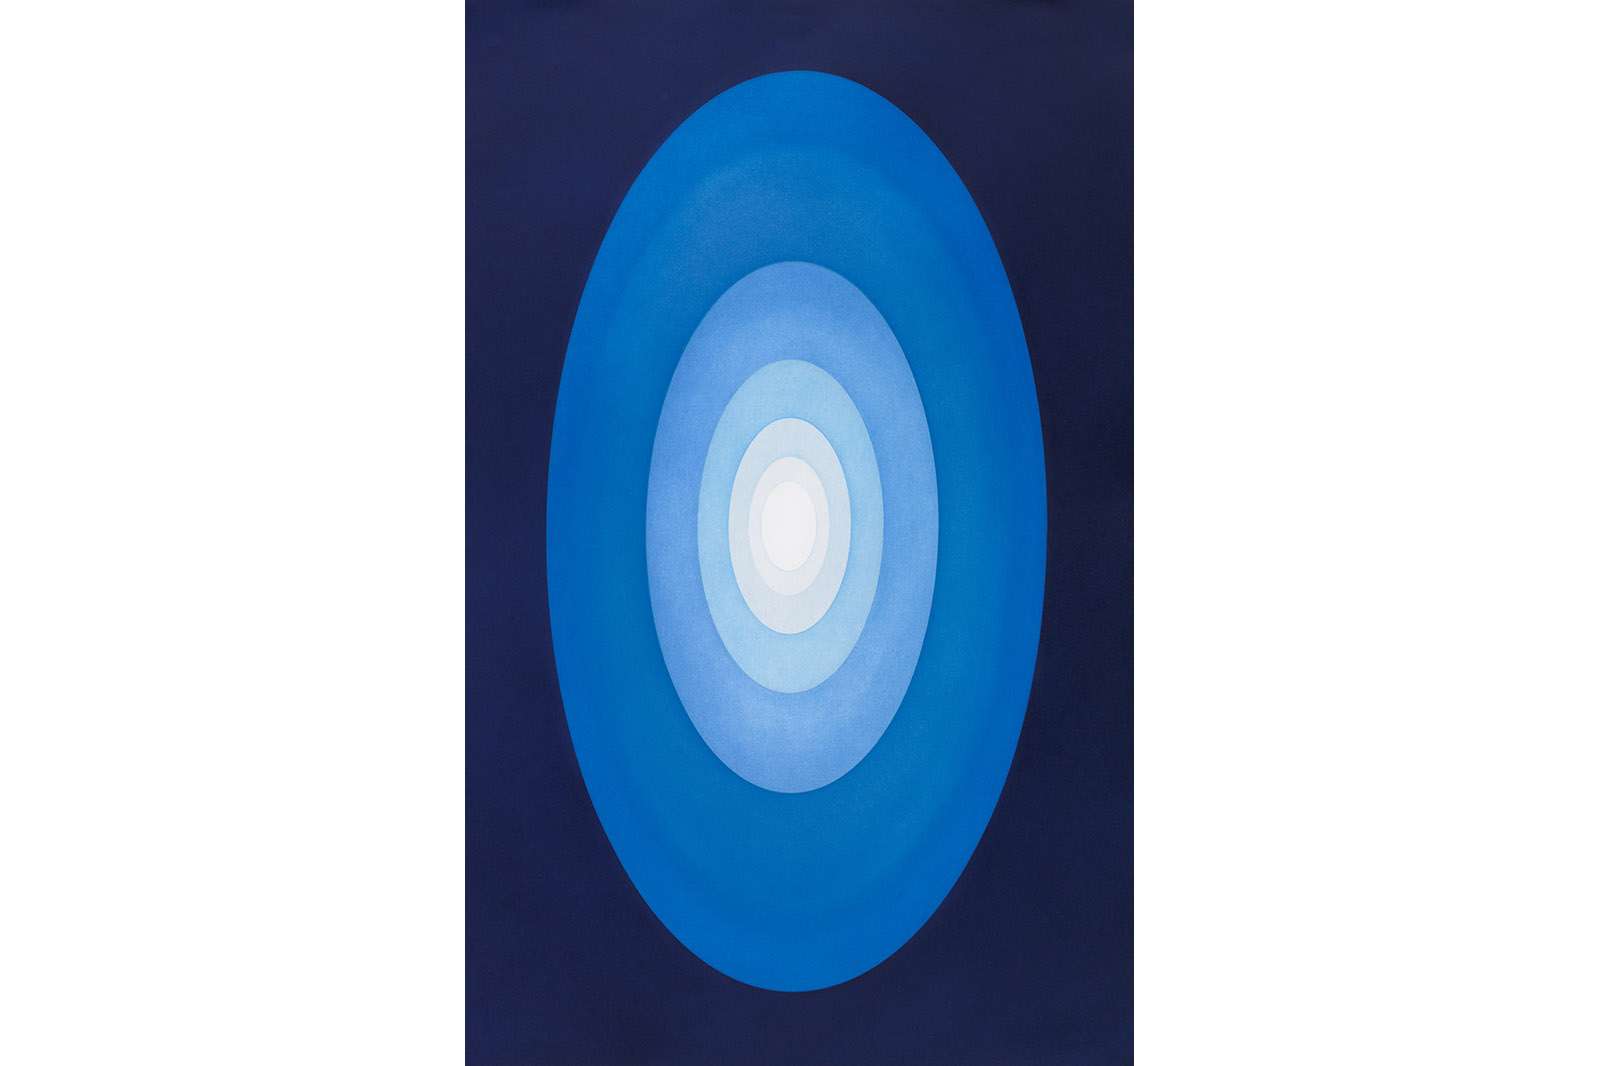 James Turrell, Meeting, 1989-90. Aquatint, 42 7/16 x 29 13/16 inches. Edition of 30.  © James Turrell. Photo courtesy of the artist and Pace Prints